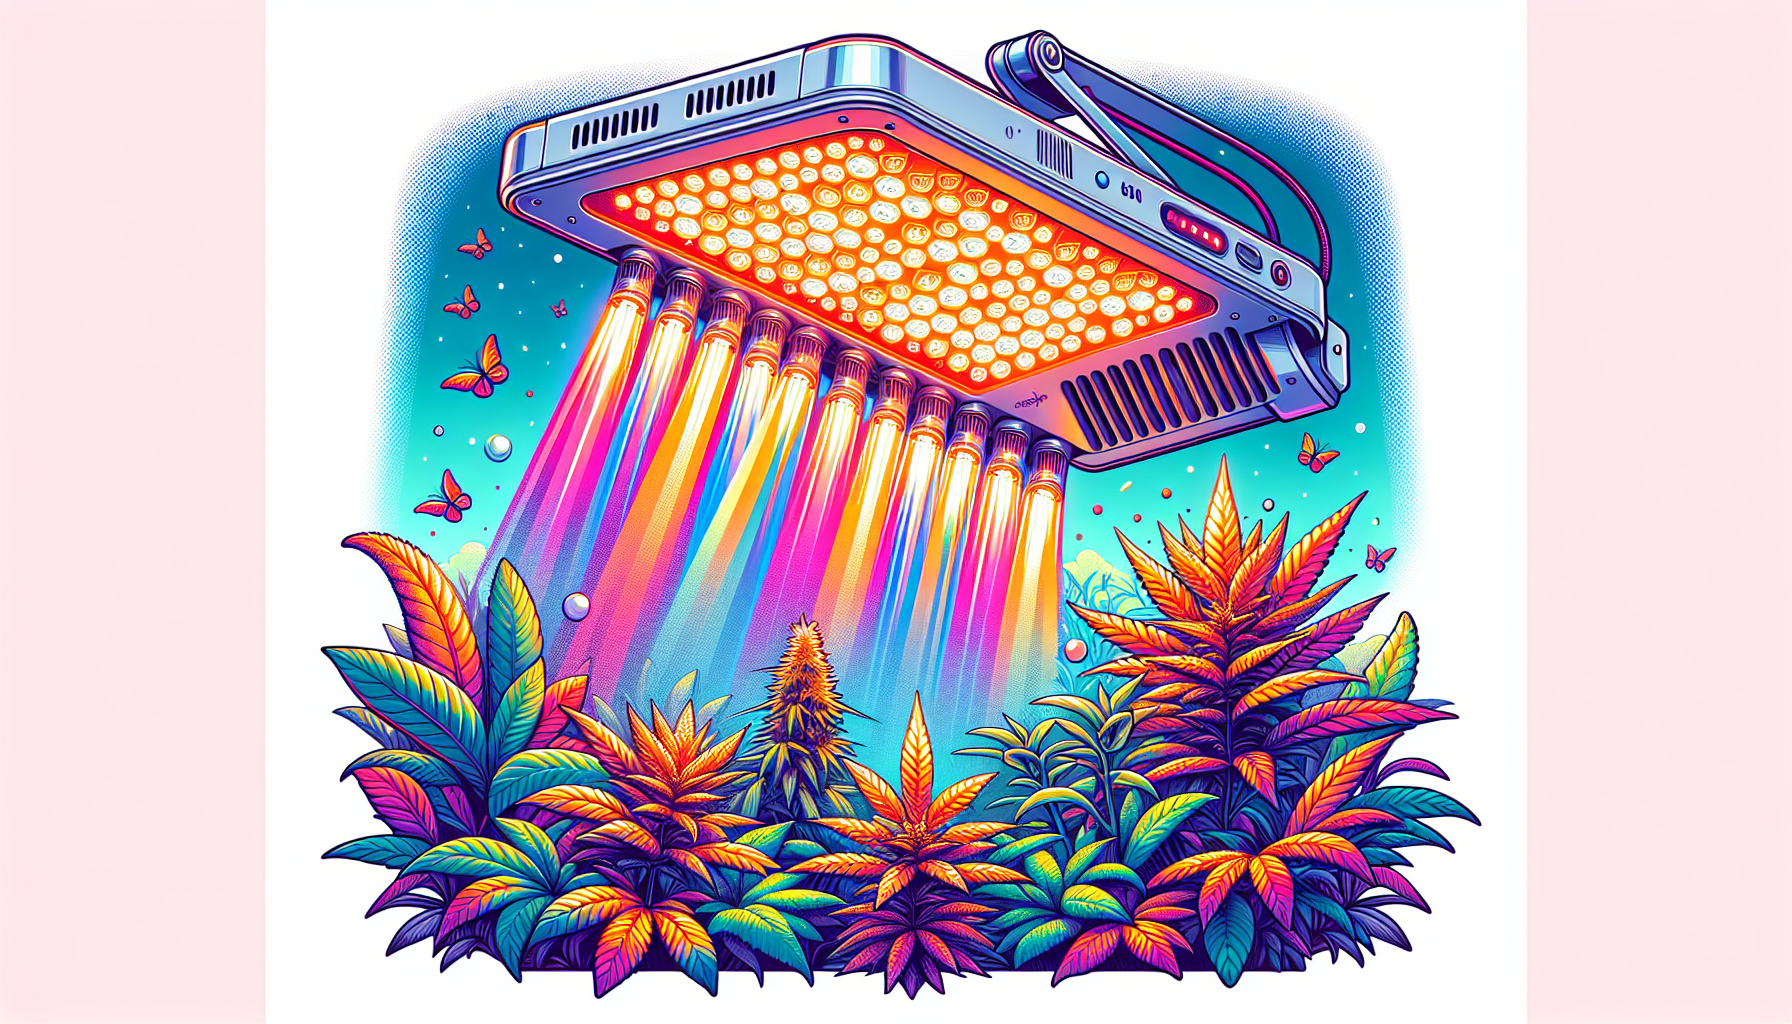 LED Grow Light 680 Watt Full Spectrum Lights SonoFarm MAXX PRO 8 Dimmable Daisy Chain - Commercial Indoors Veg  Flower Growing Lamps - Hydroponics Greenhouse Lamp 3000K 5000K 660nm 760nm IR Diodes